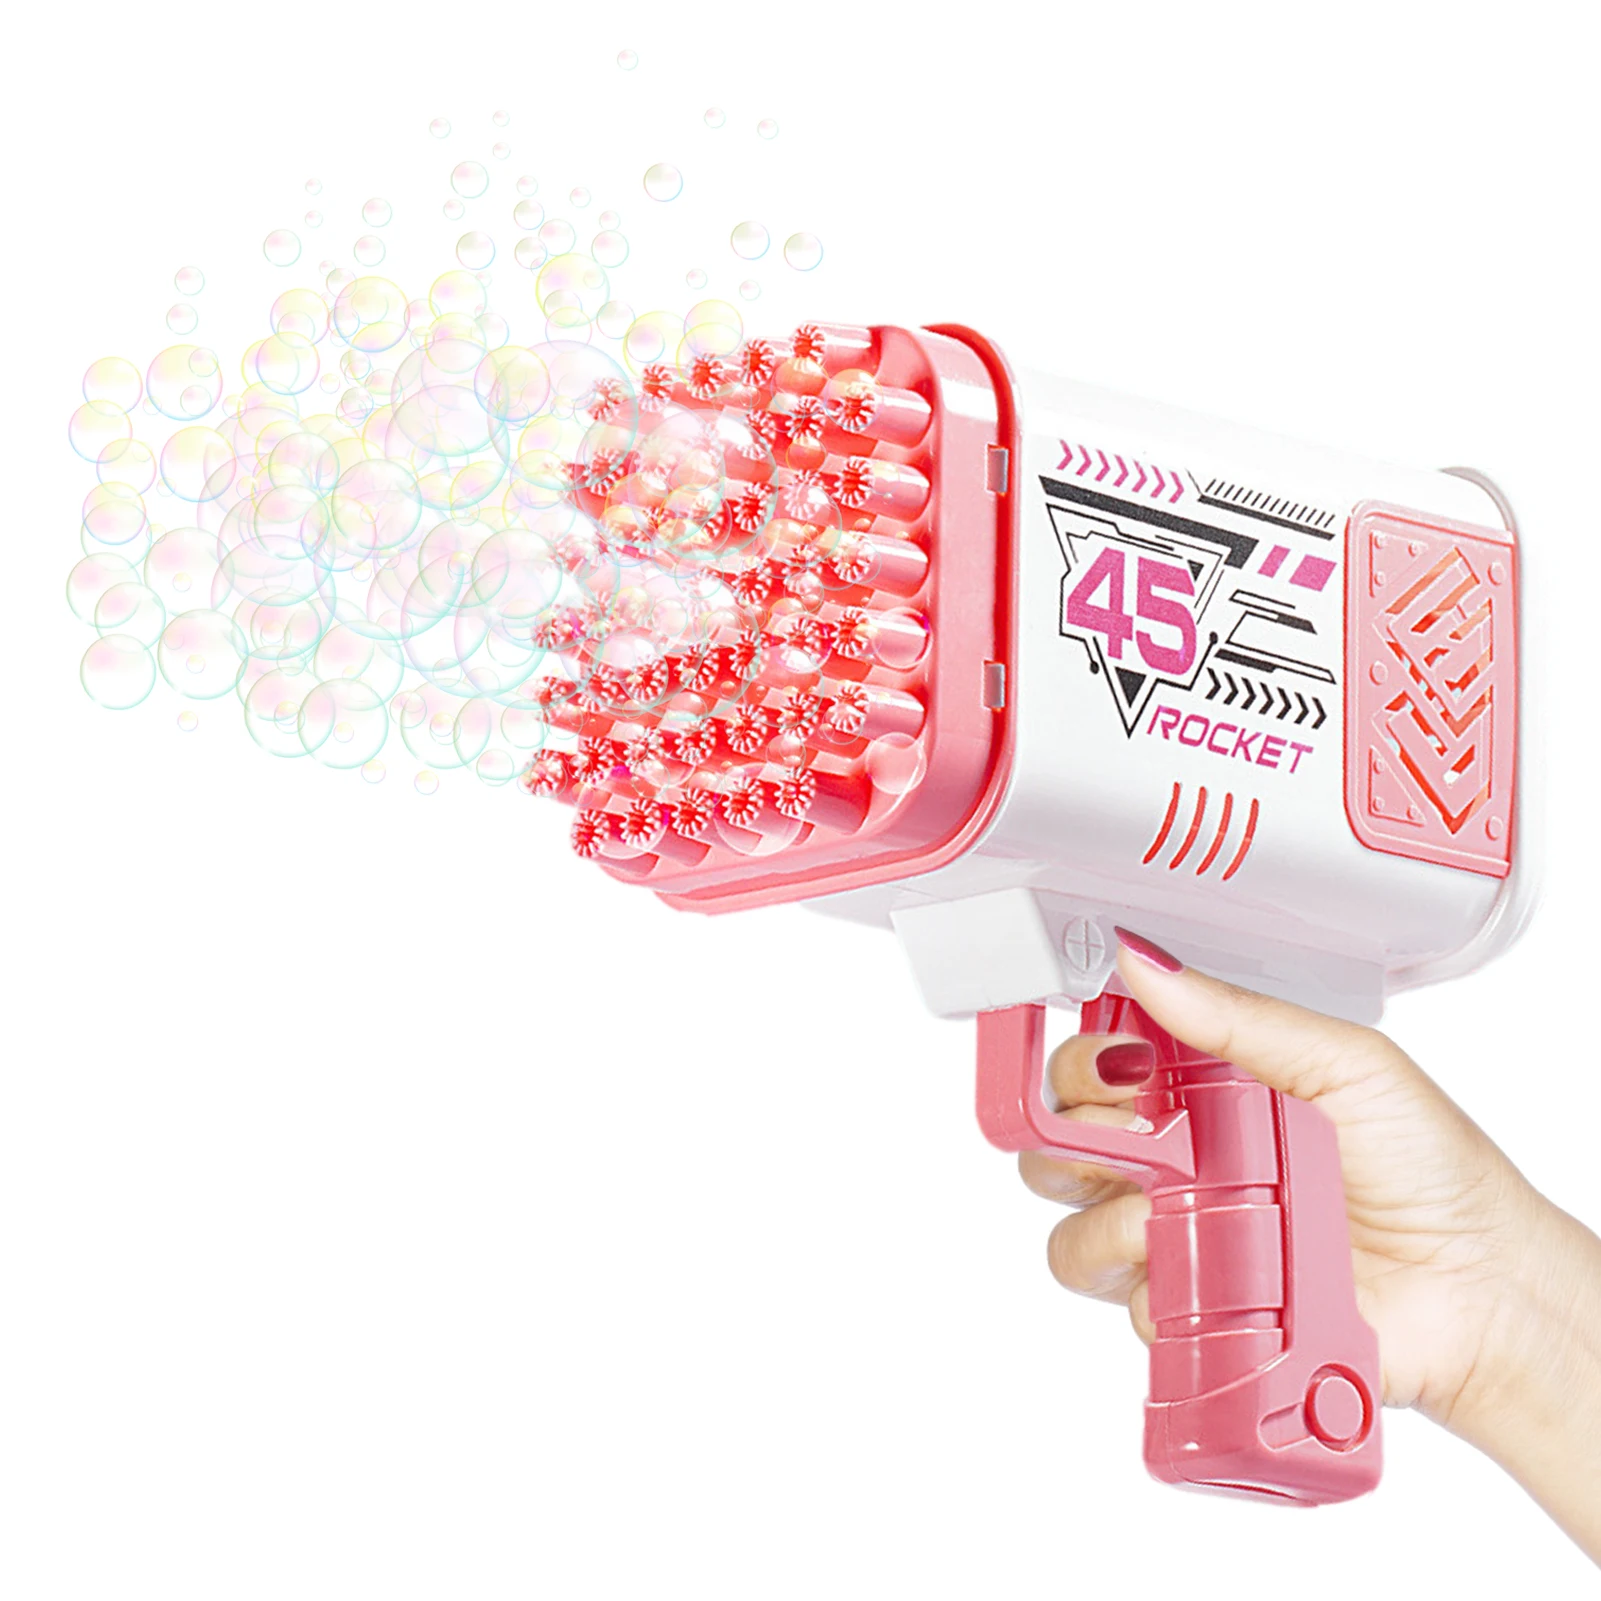 

45 Holes Bubble Maker Toy Portable Bubble Guns Toys For Kids Summer Games Automatic Electric Bubbles Blower Blaster For Summer